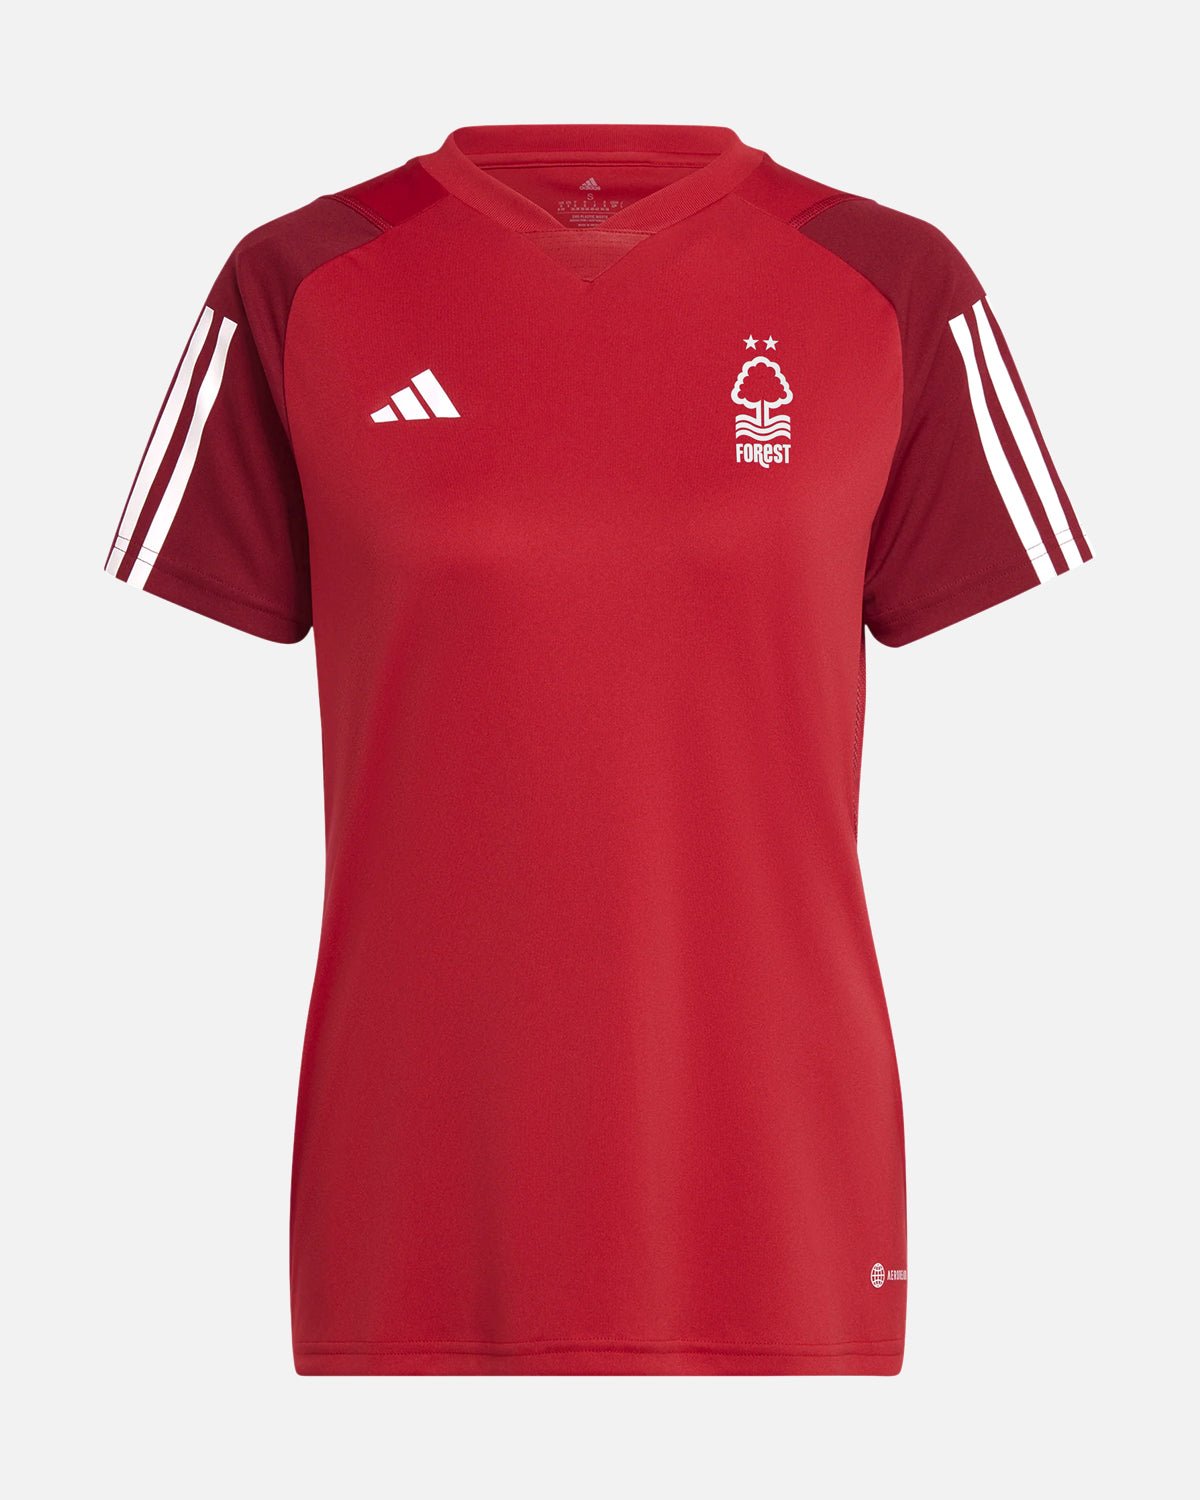 NFFC Women's Red Training Jersey 23-24 - Nottingham Forest FC